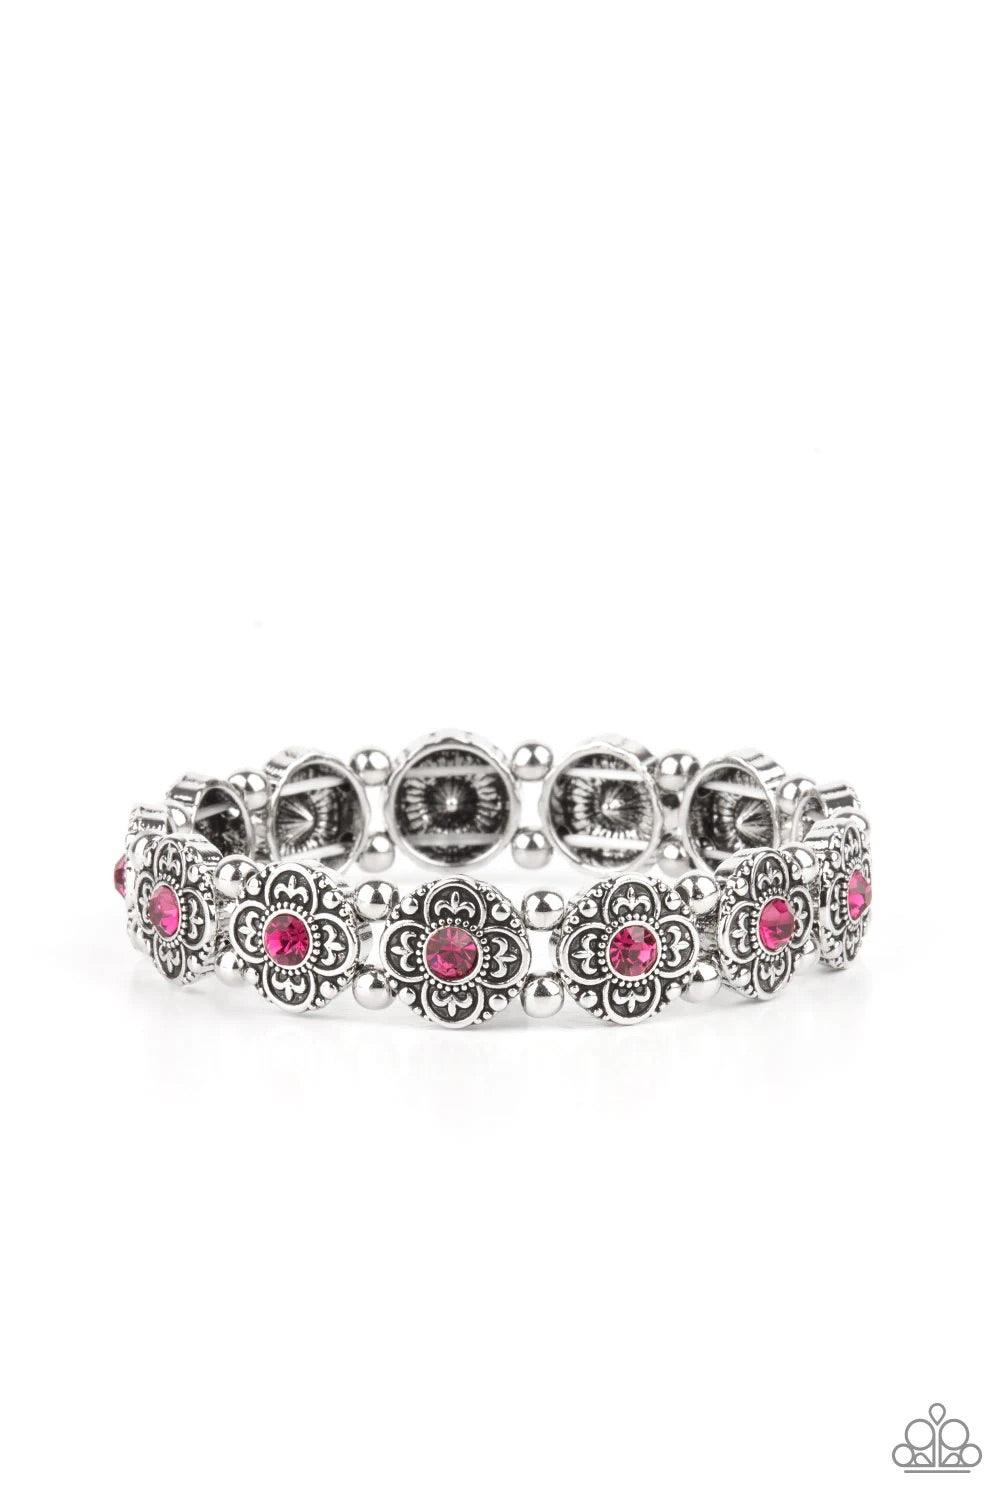 Paparazzi Accessories Tres Magnifique ~Pink Dotted with glittery pink rhinestone centers, antiqued silver floral frames and dainty silver beads are threaded along stretchy bands around the wrist for a seasonal twist. Sold as one individual bracelet. Jewel